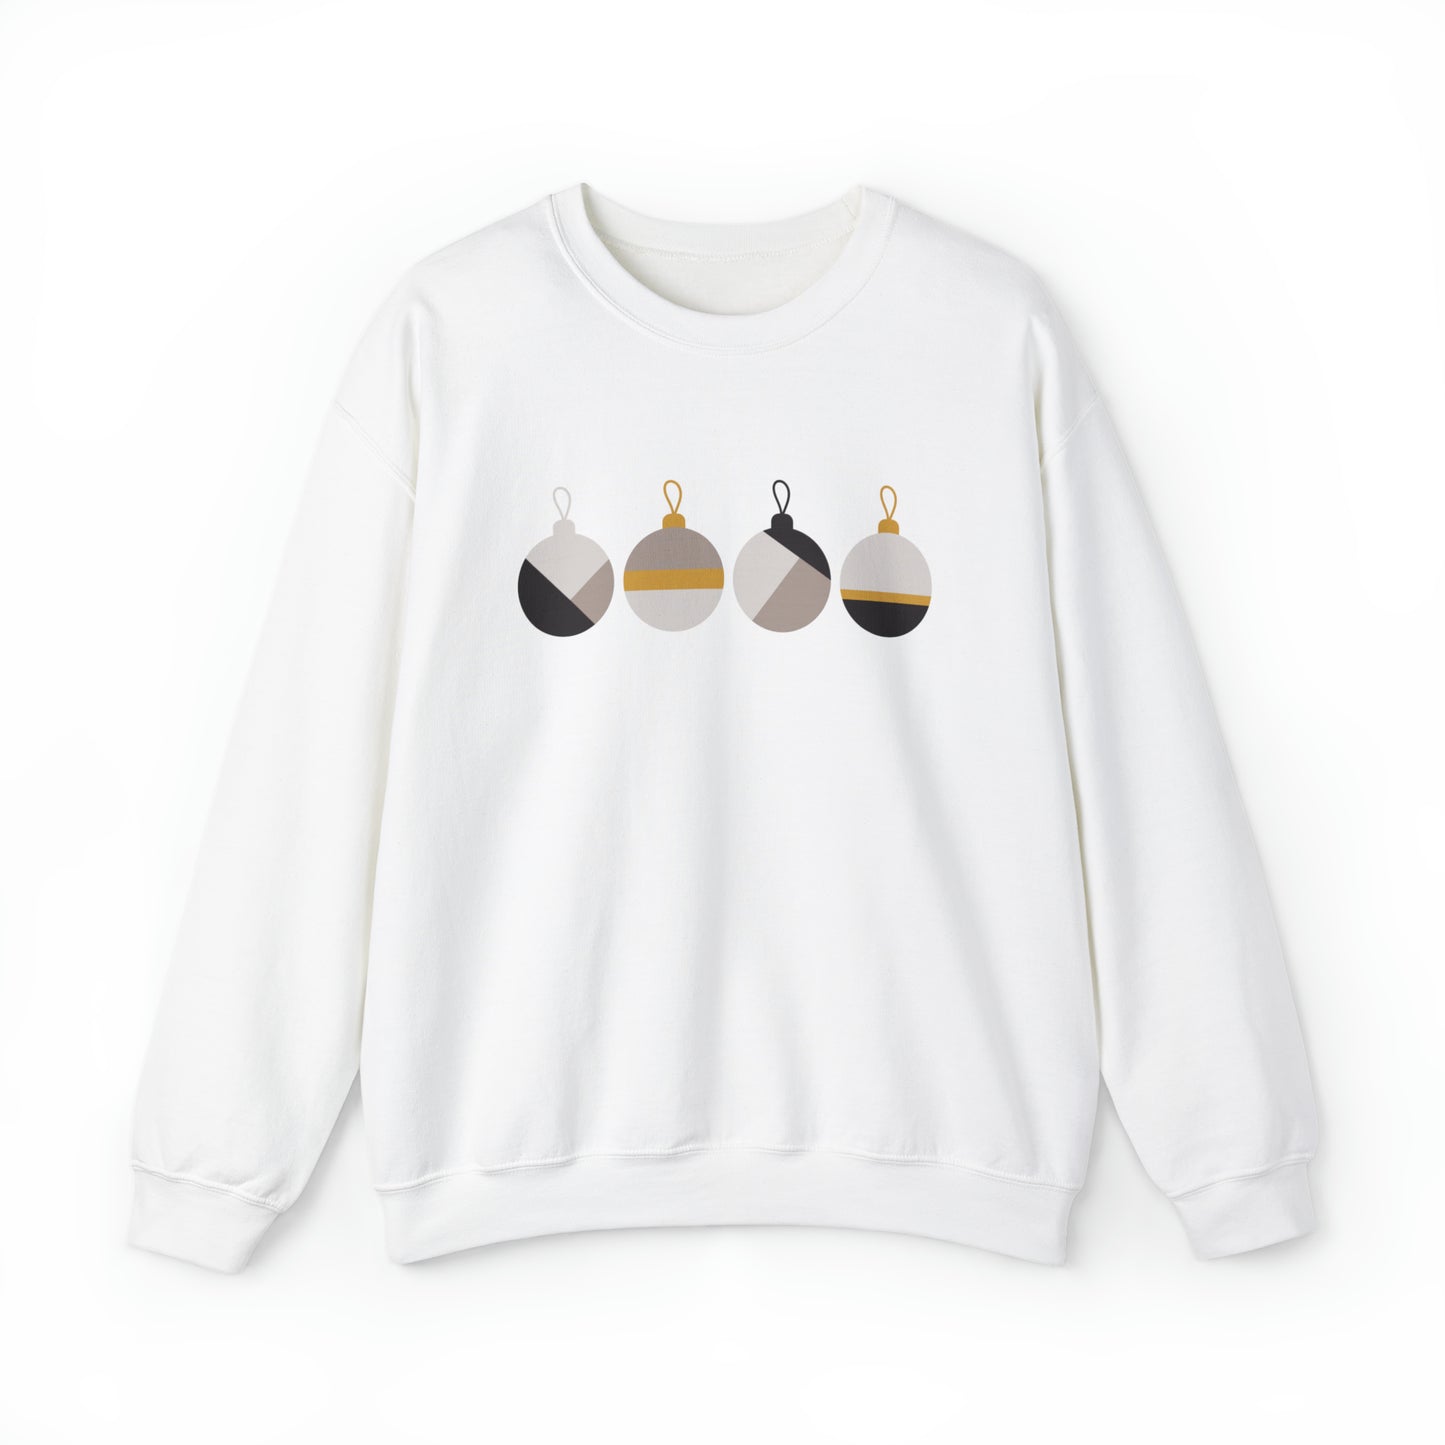 Merry Christmas Sweatshirt with Simple Bulb Ornaments